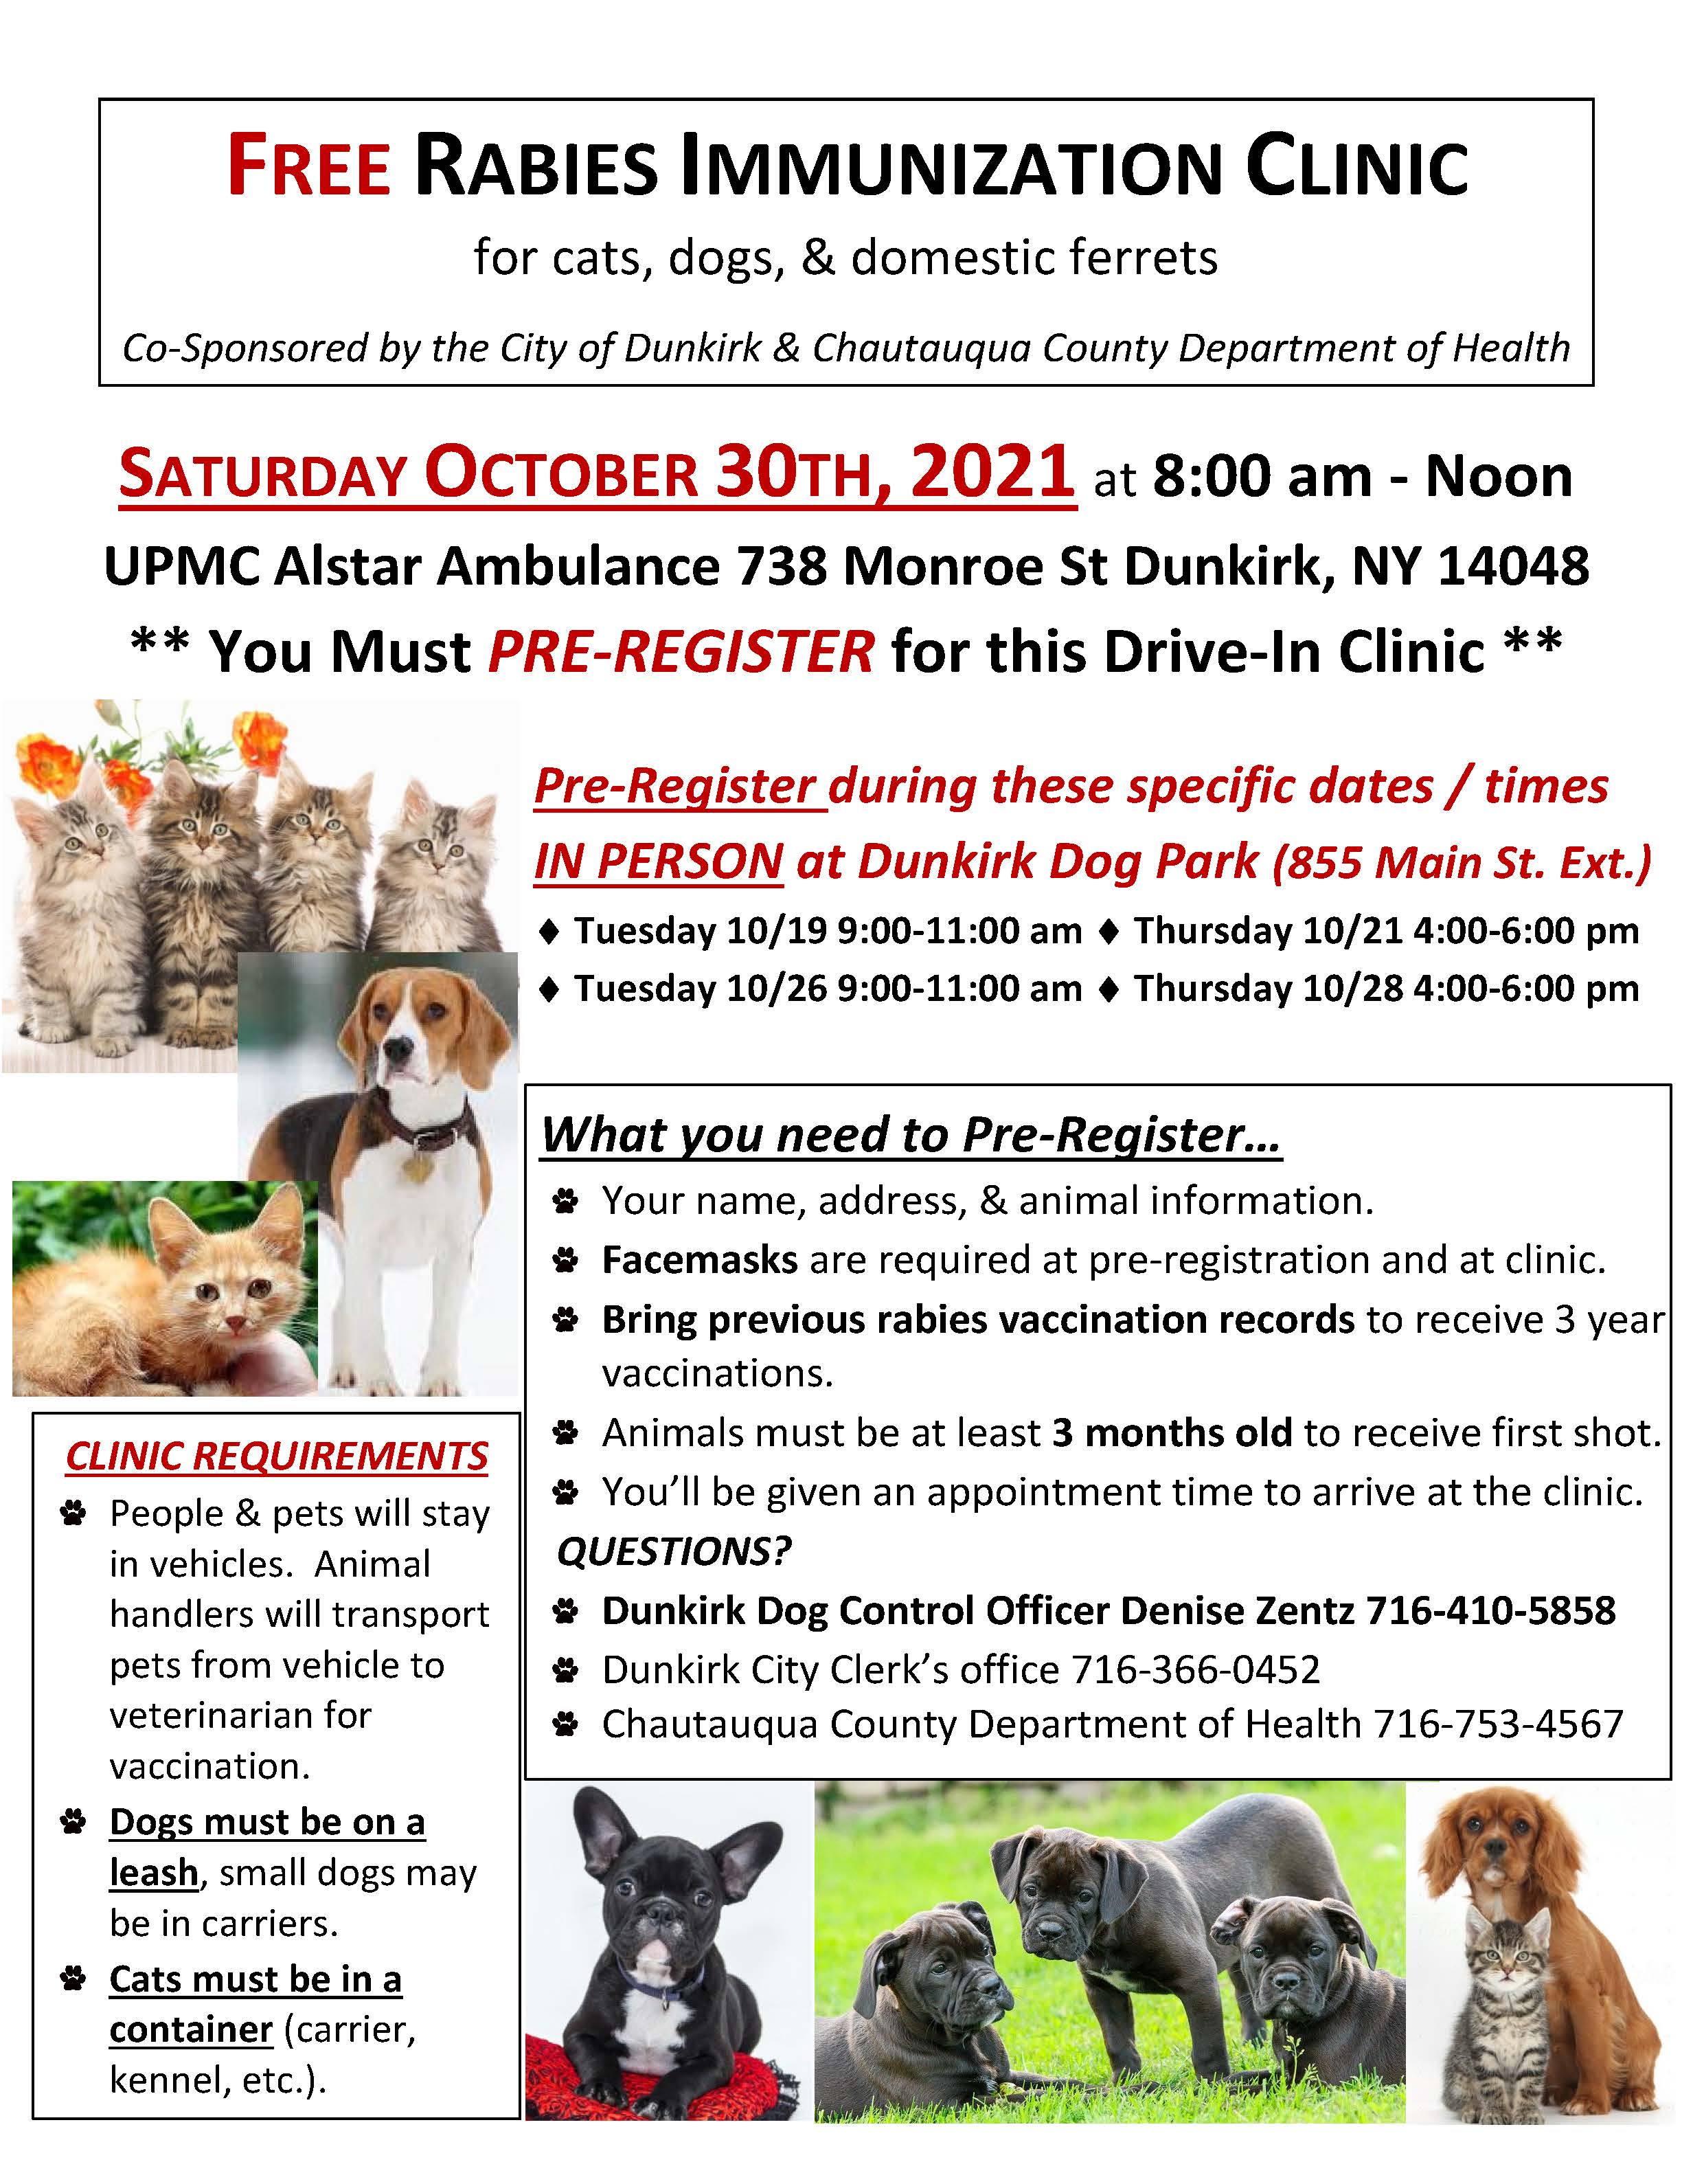 City Of Dunkirk And Chautauqua County Department Of Health To Put On Free  Rabies Clinic October 30 - Chautauqua County Humane Society